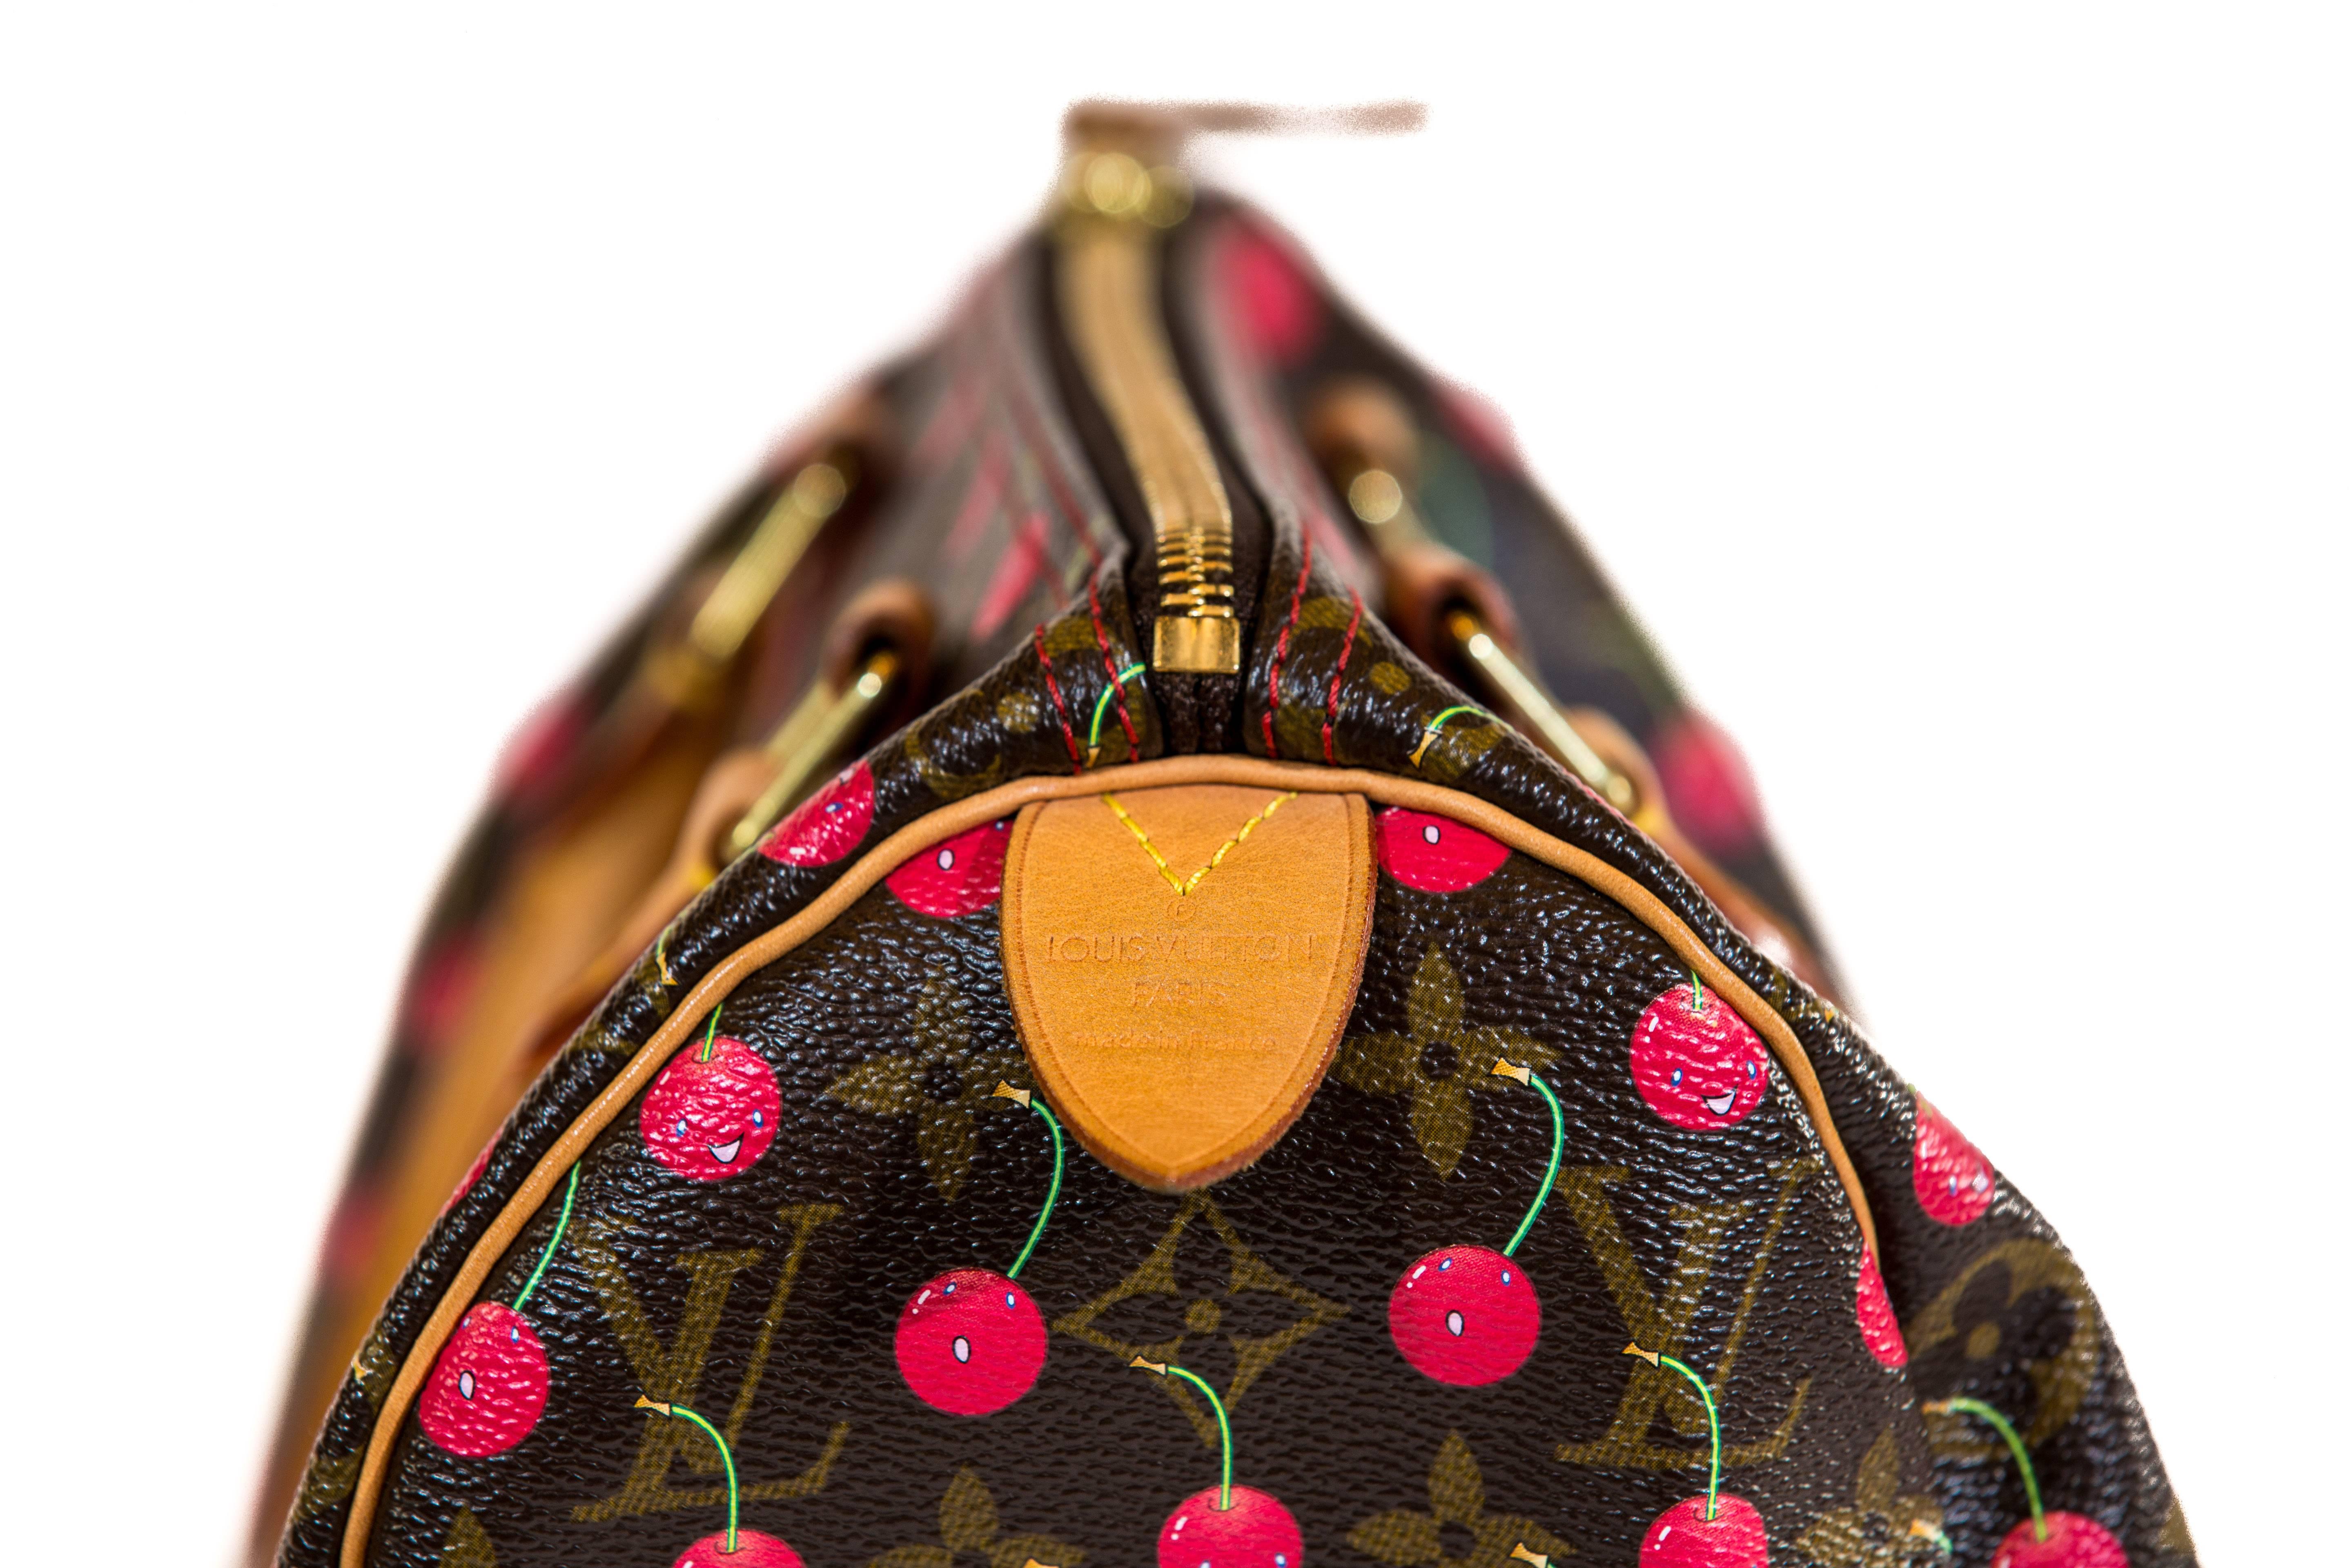 Own the coveted Louis Vuitton Speedy Handbag 25 - Limited Edition Cerises - from the 2005 Spring collection. Japanese pop artist Takashi Murakami wowed fashion lovers with a red cherry print over Louis Vuitton's classic brown monogram canvas print.